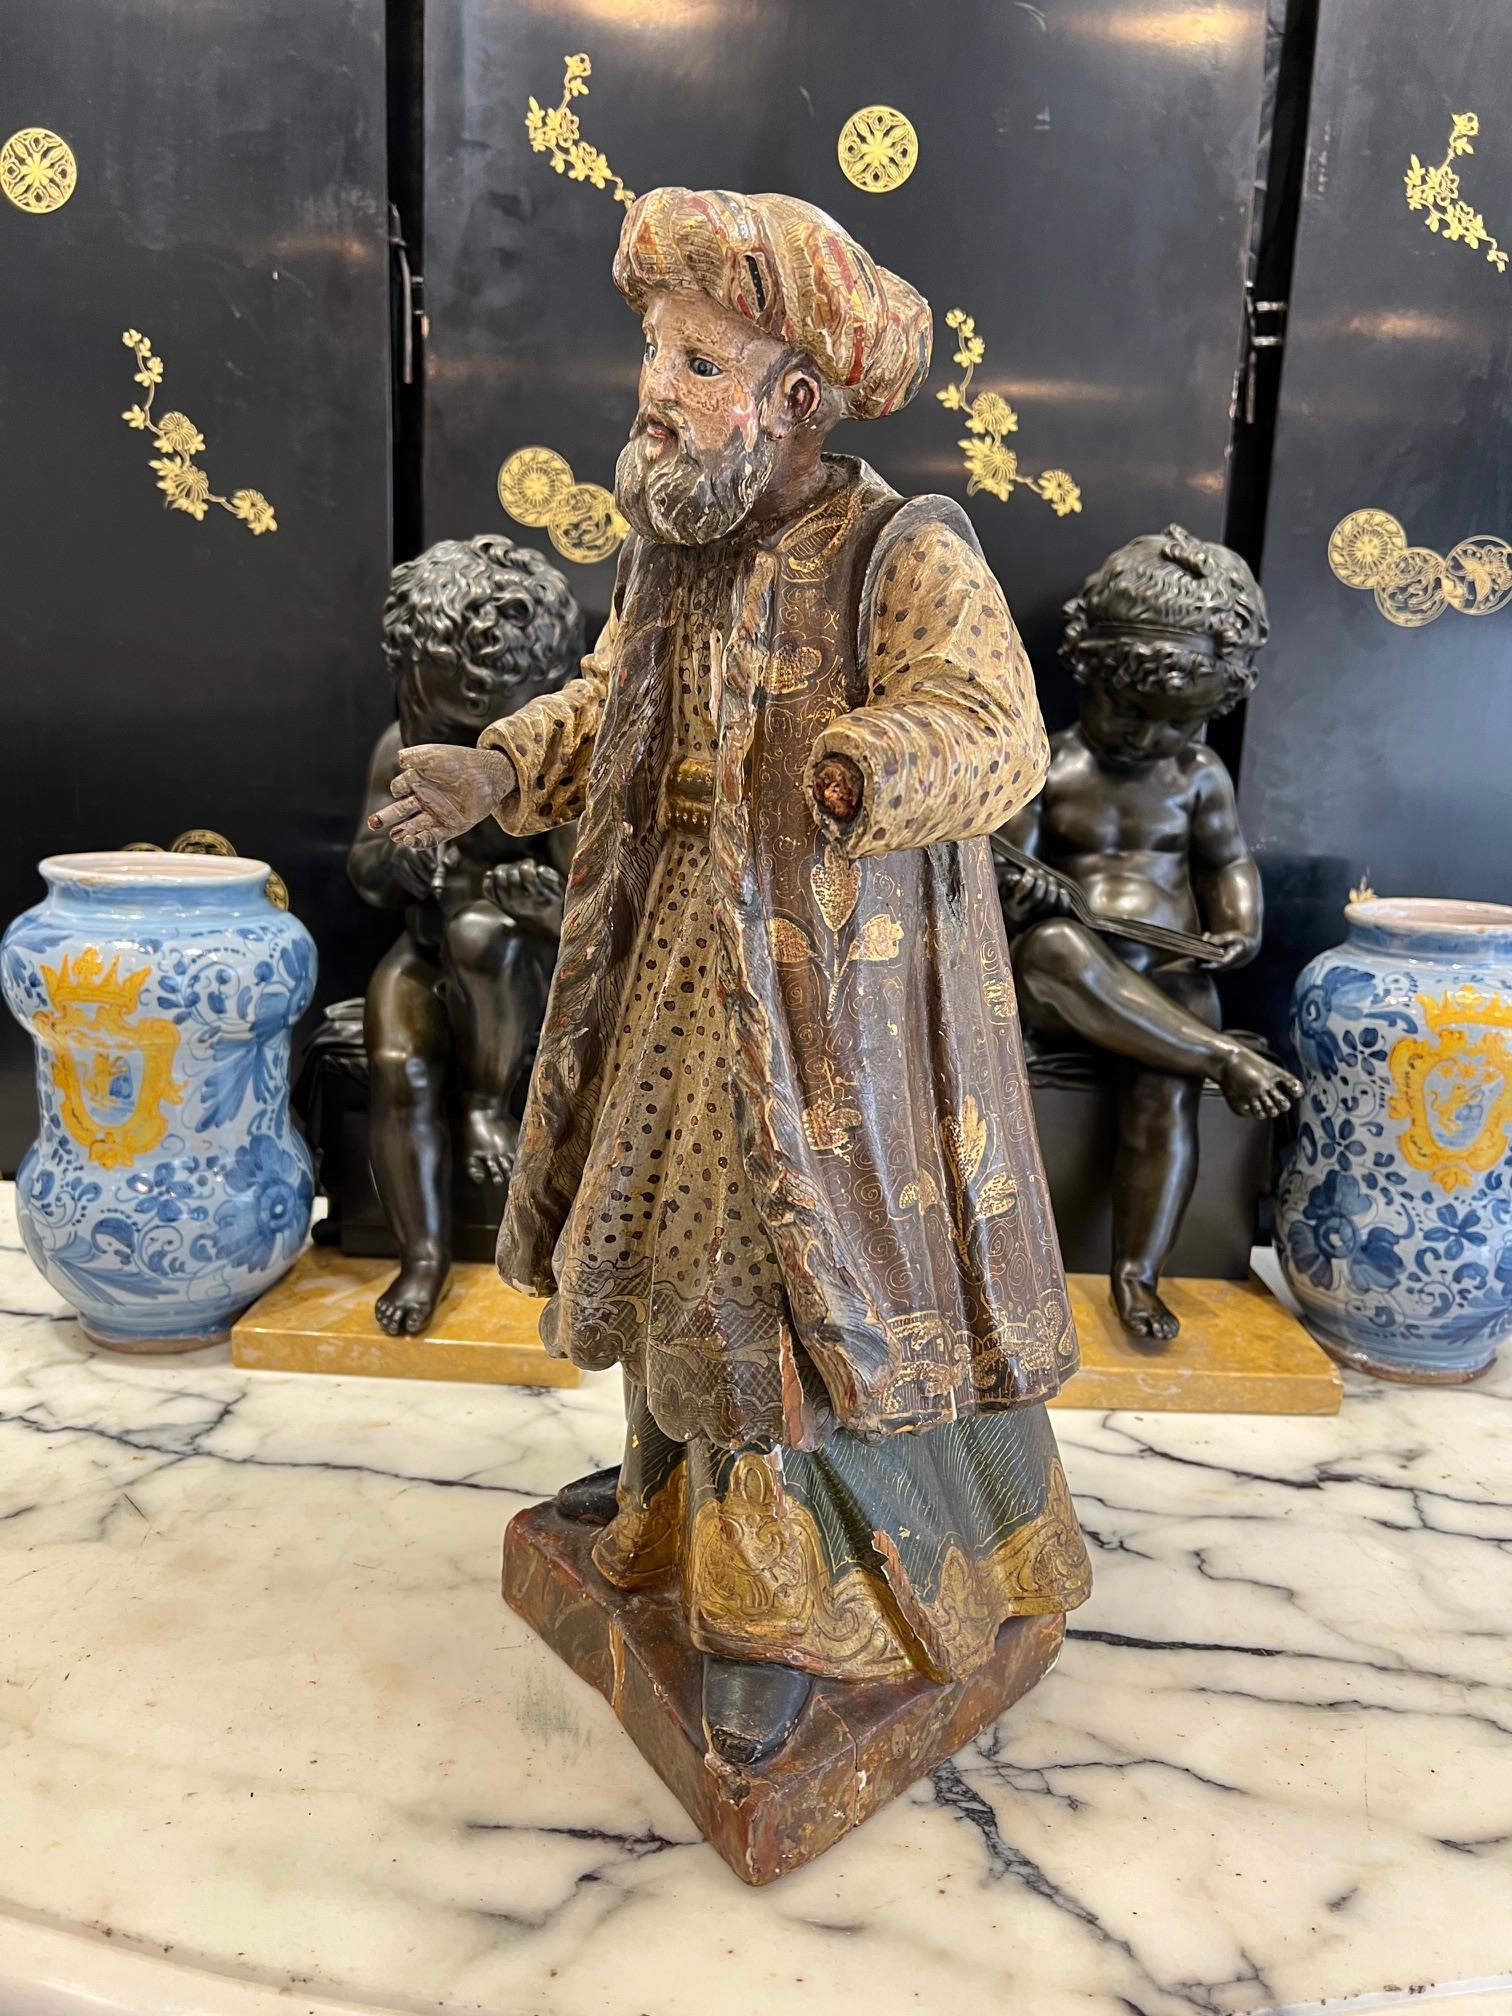 A RARE 18TH CENTURY ITALIAN POLYCHROME DECORATED FIGURE OF AN OTTOMAN - Image 5 of 7